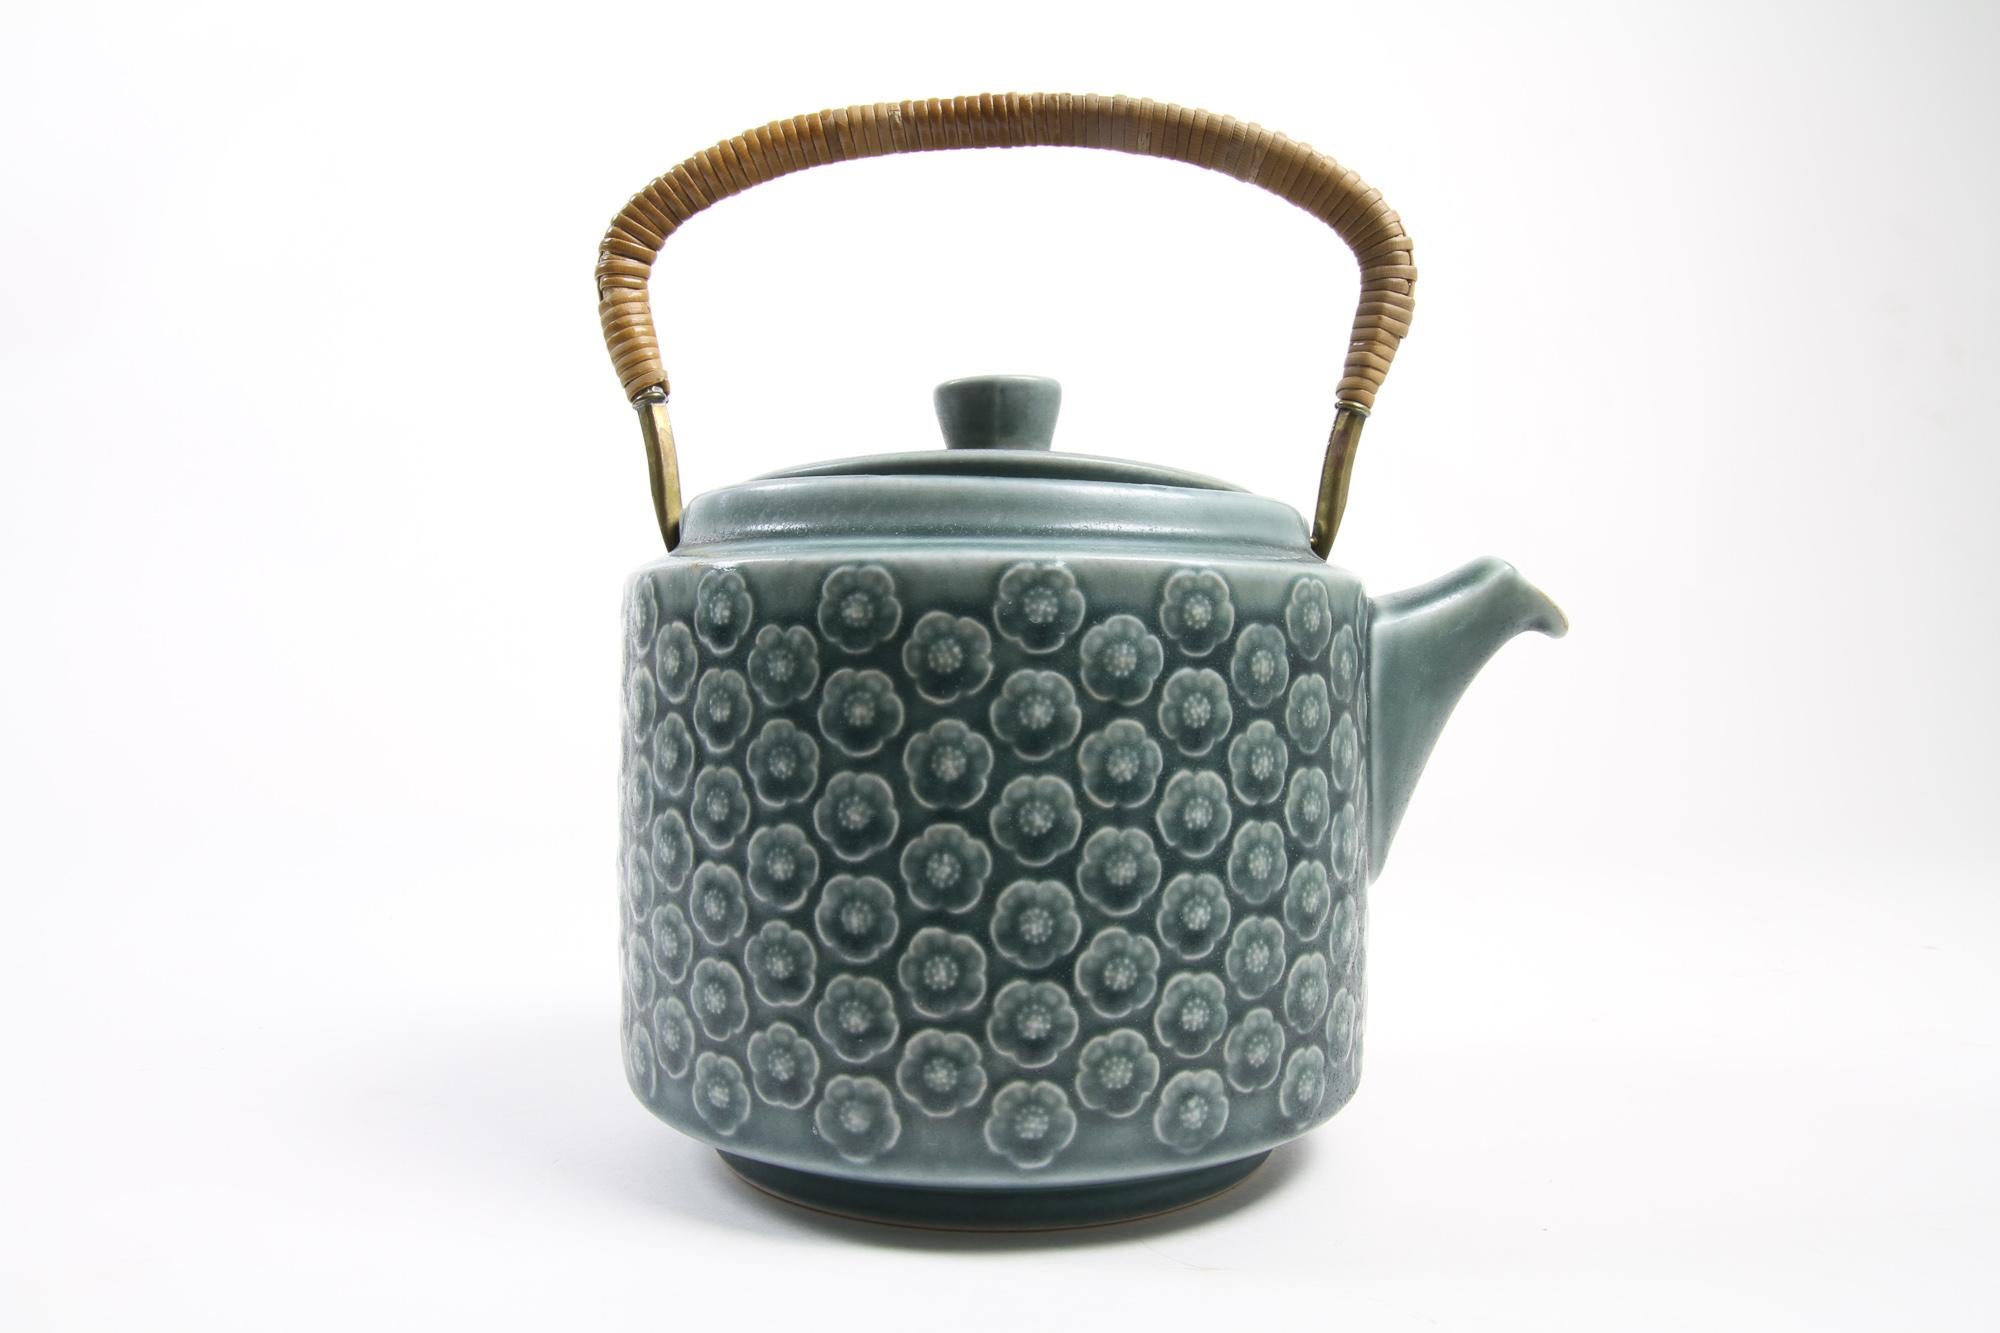 Vintage Danish Azur stoneware teapot by Jens H. Quistgaard for Kronjyden, 1960s.
This beautiful Mid-Century Modern stoneware by IHQ set consists of a tea pot with lid and a small square bowl. Tea pot handle in brass wrapped in cane. Very lovely